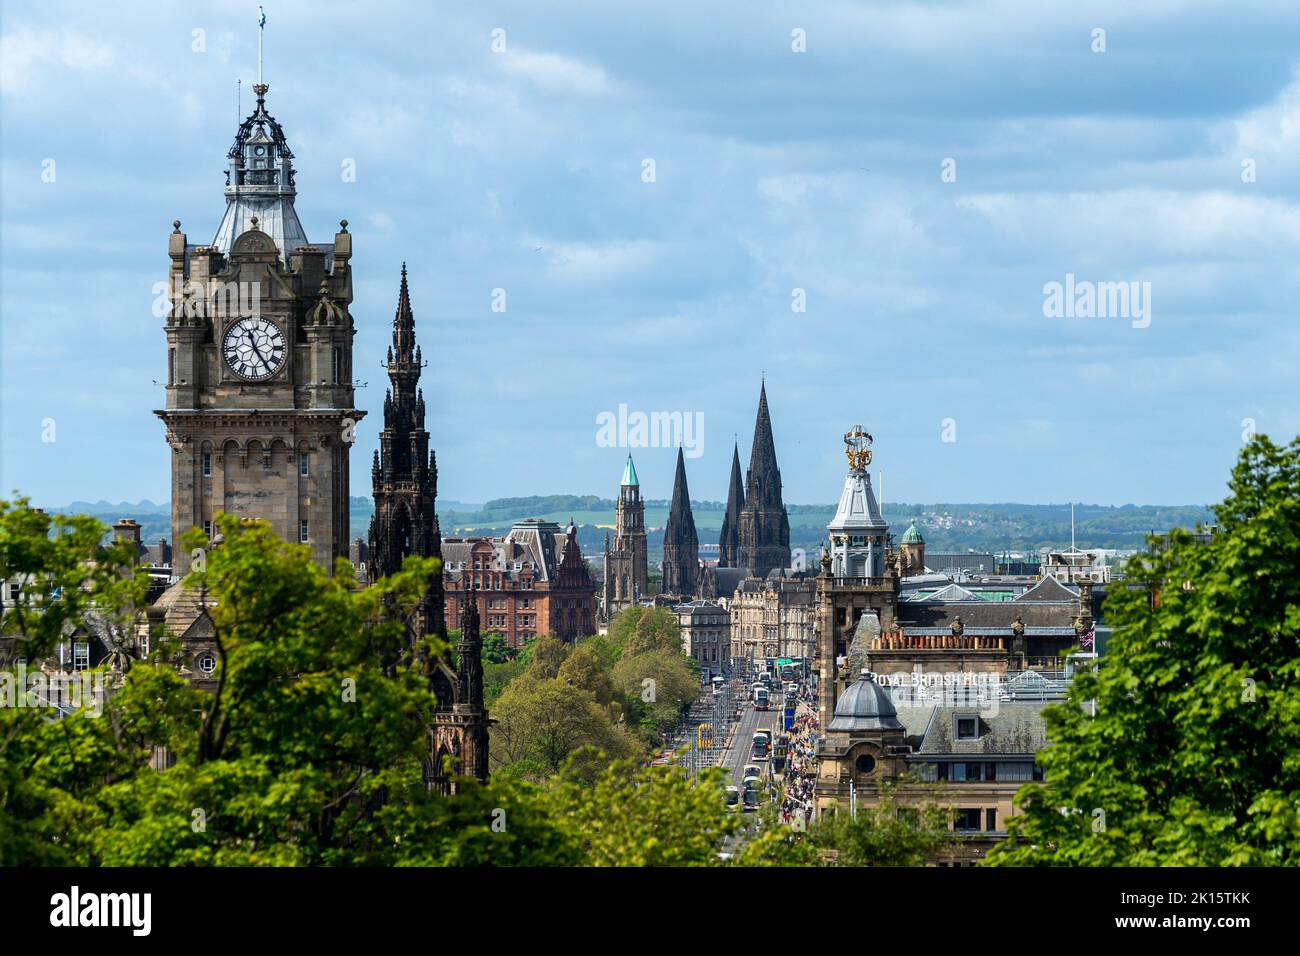 Looking West Along Princes Street Edinburgh, UK From Calton Hill. With The Balmoral Hotel Clock Tower & The Scott Monument In Foreground. Stock Photo